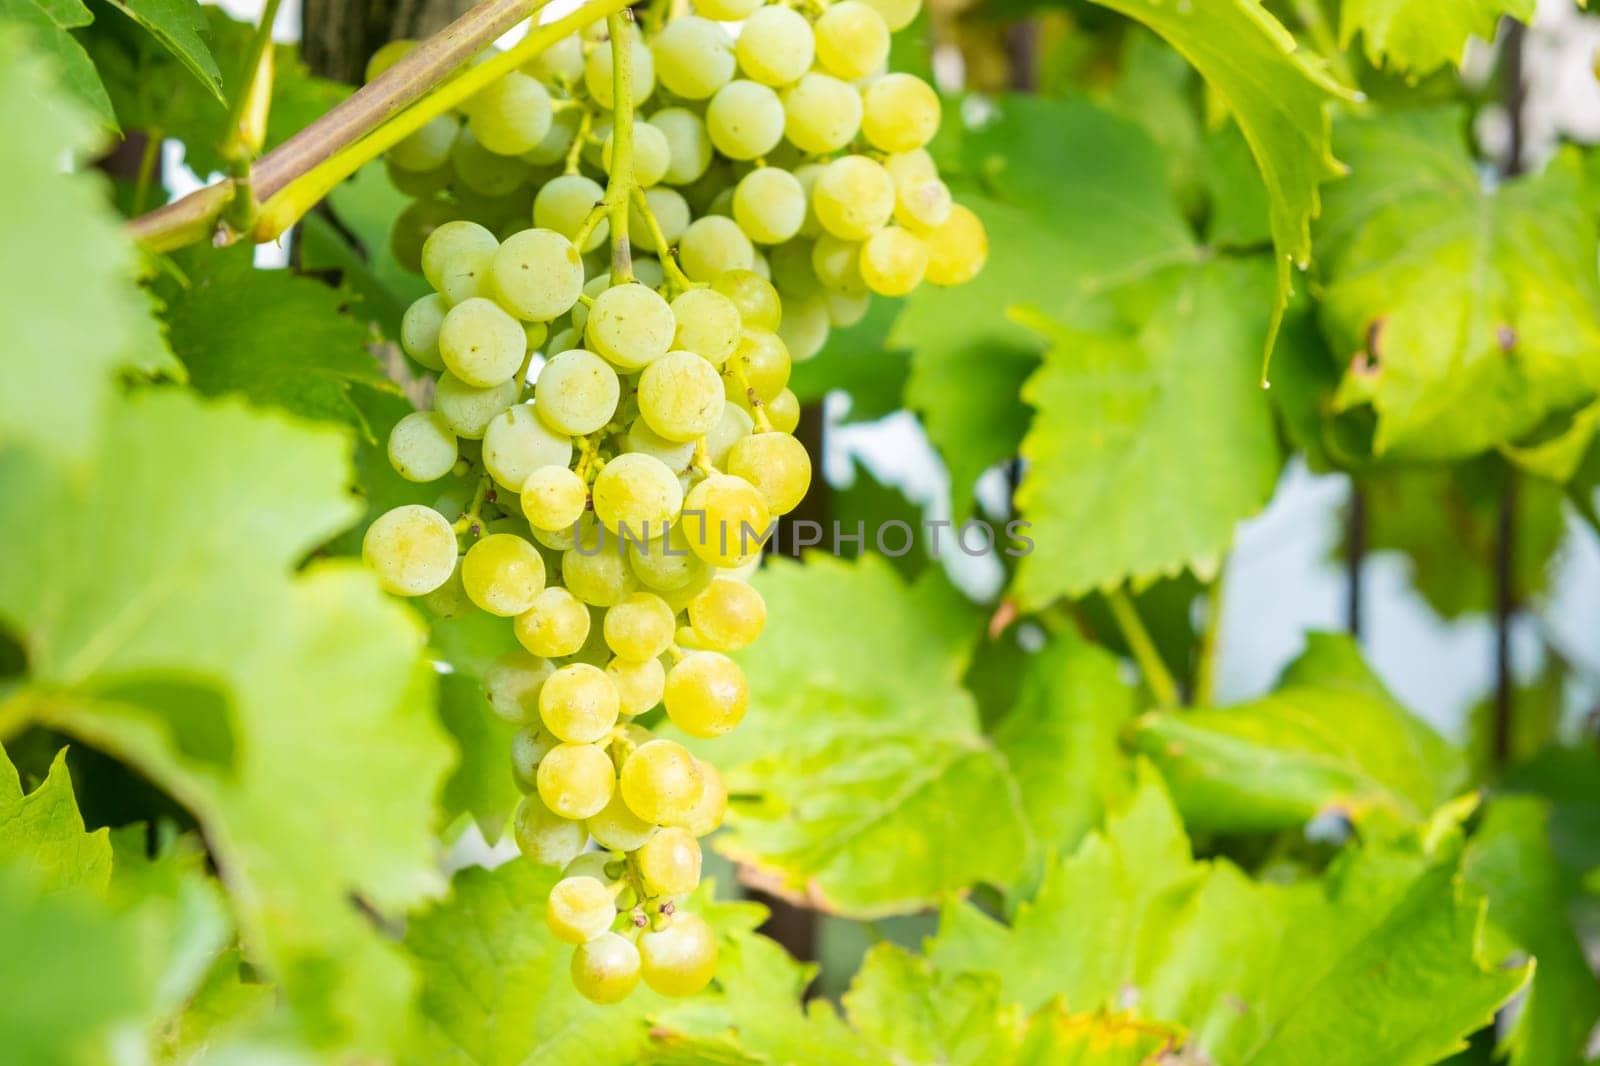 Ripe white grape bunches on a vineyard in summer. Good harvest for prosecco or sparkling wine production.